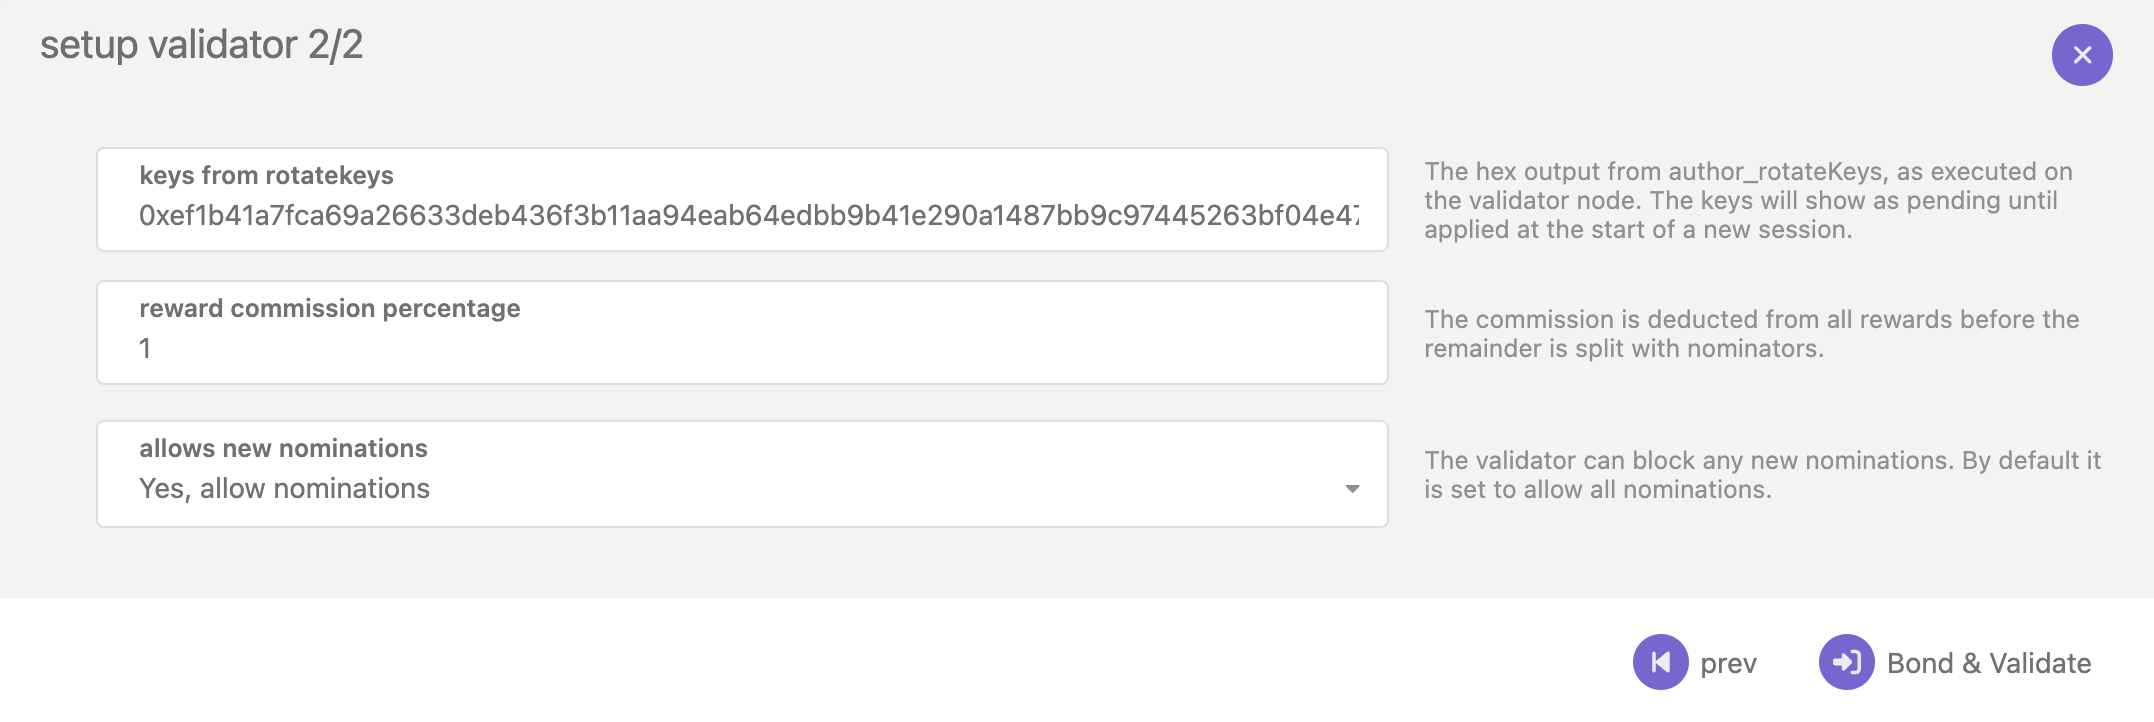 Page 2 of the Setup Validator — set keys, reward commission and allowing of nominations